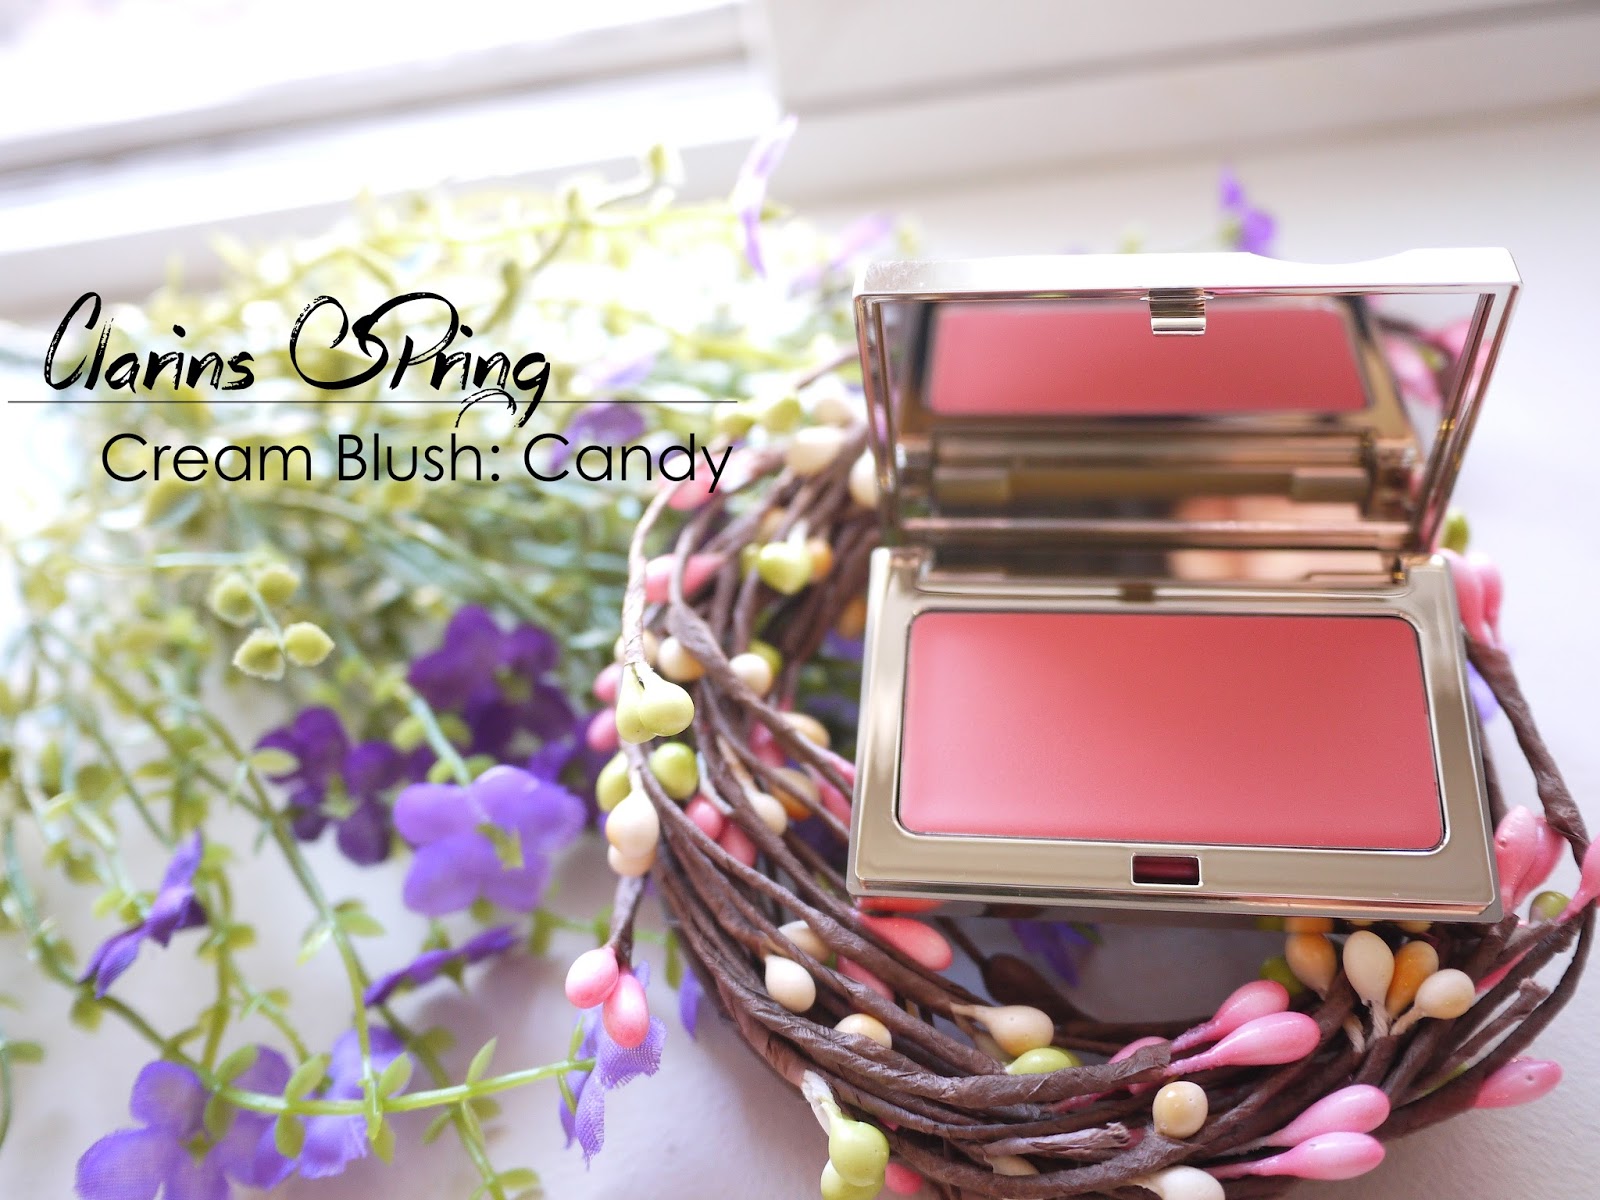 clarins spring 2014 multi-cream blush candy swatch review